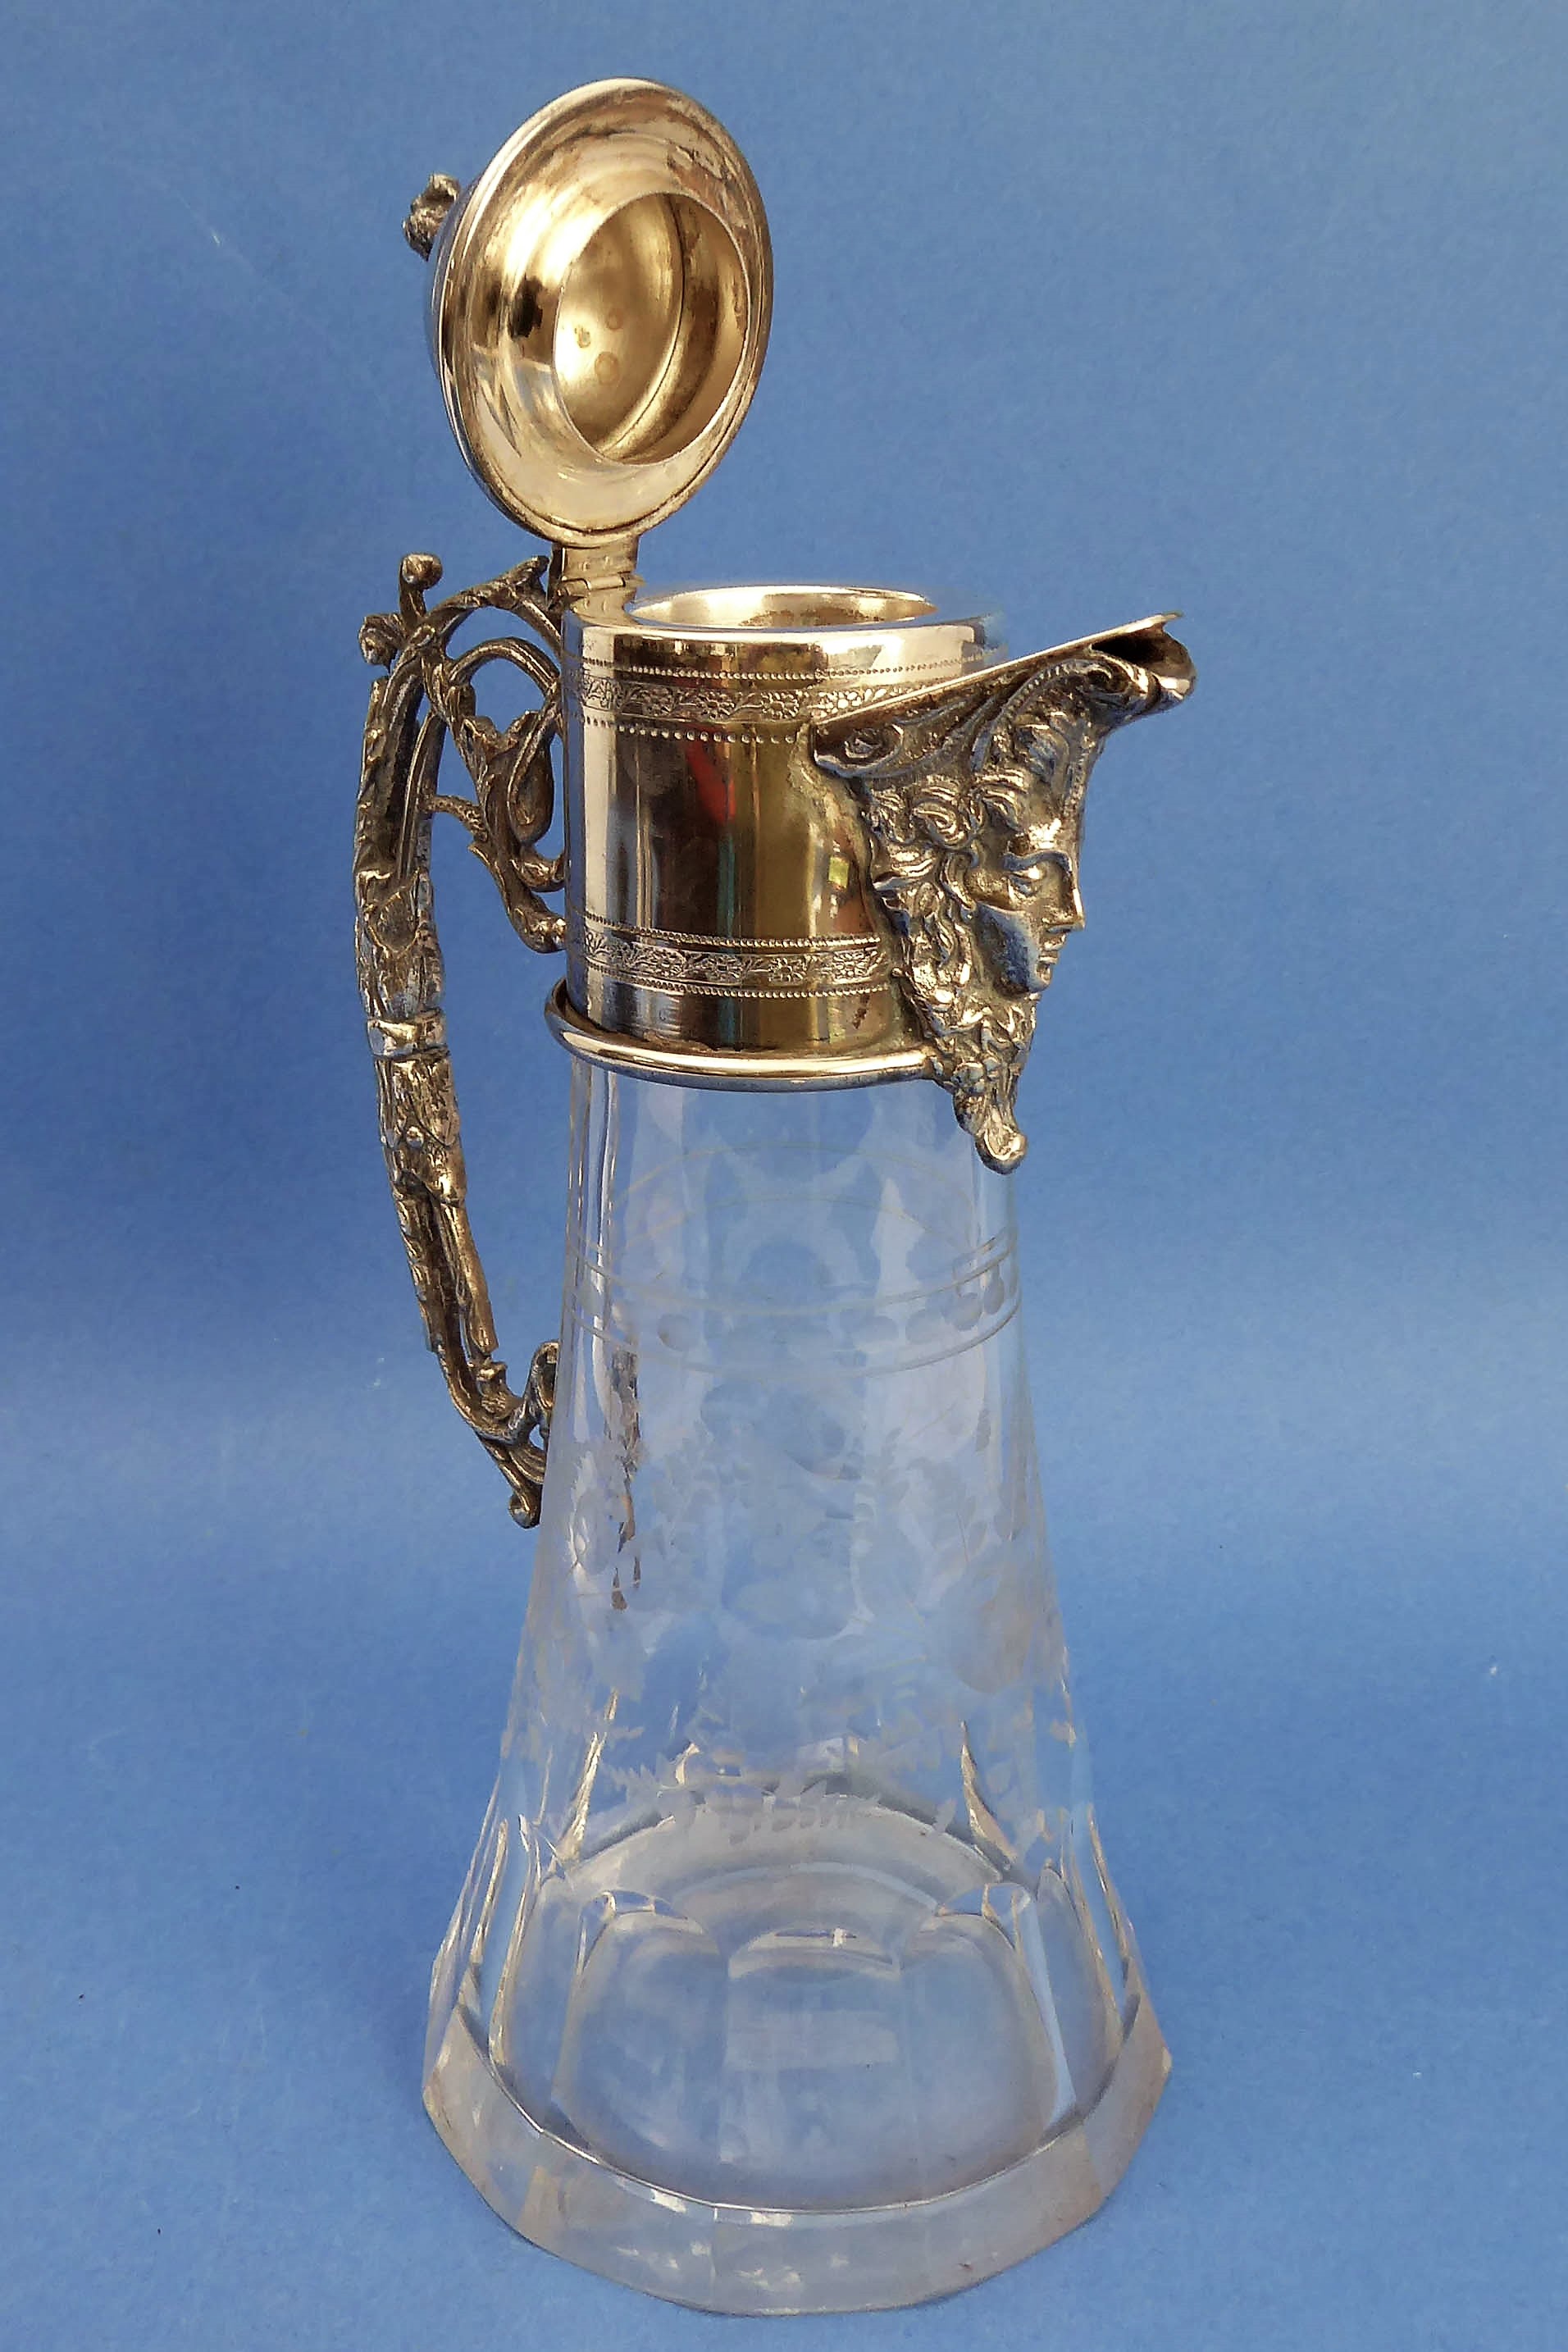 An ornate late 19th century claret jug with silver-plated mounts - Image 3 of 5